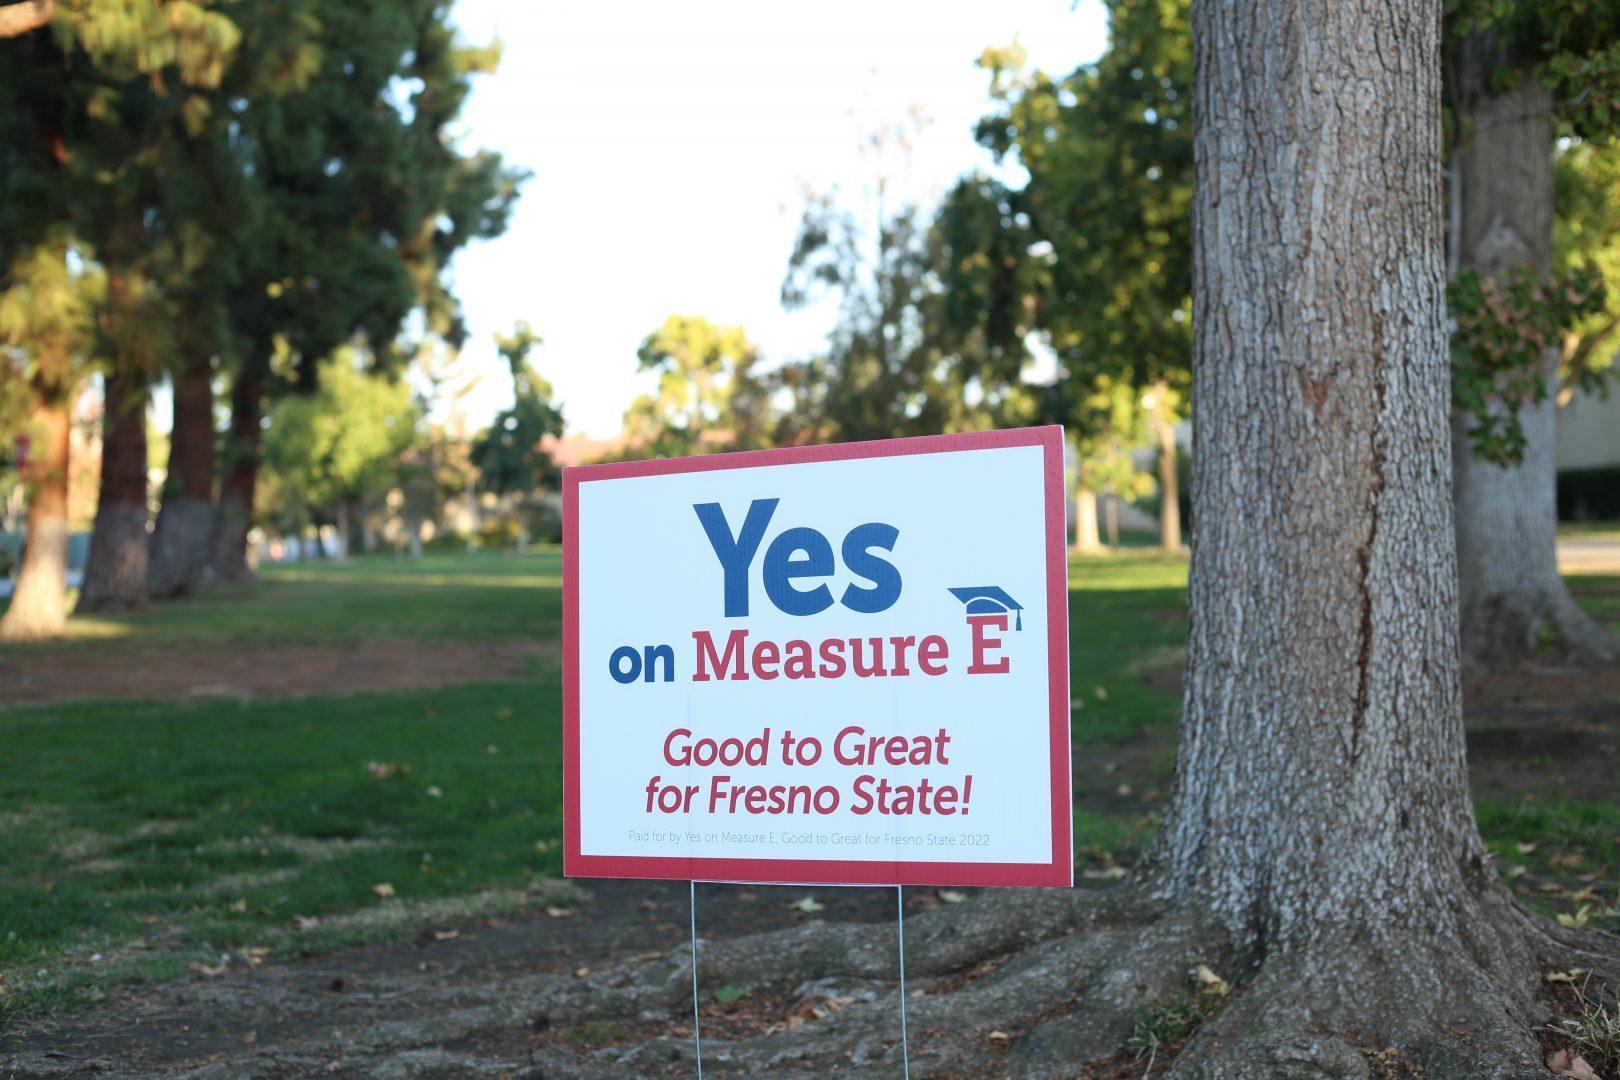 Fresno+County+residents+will+vote+on+Measure+E%2C+a+proposed+0.2%25+countywide+sales+tax+to+fund+Fresno+State+academics+and+athletics%2C+for+the+upcoming+General+Election.+%28Manuel+Hernandez%2FThe+Collegian%29